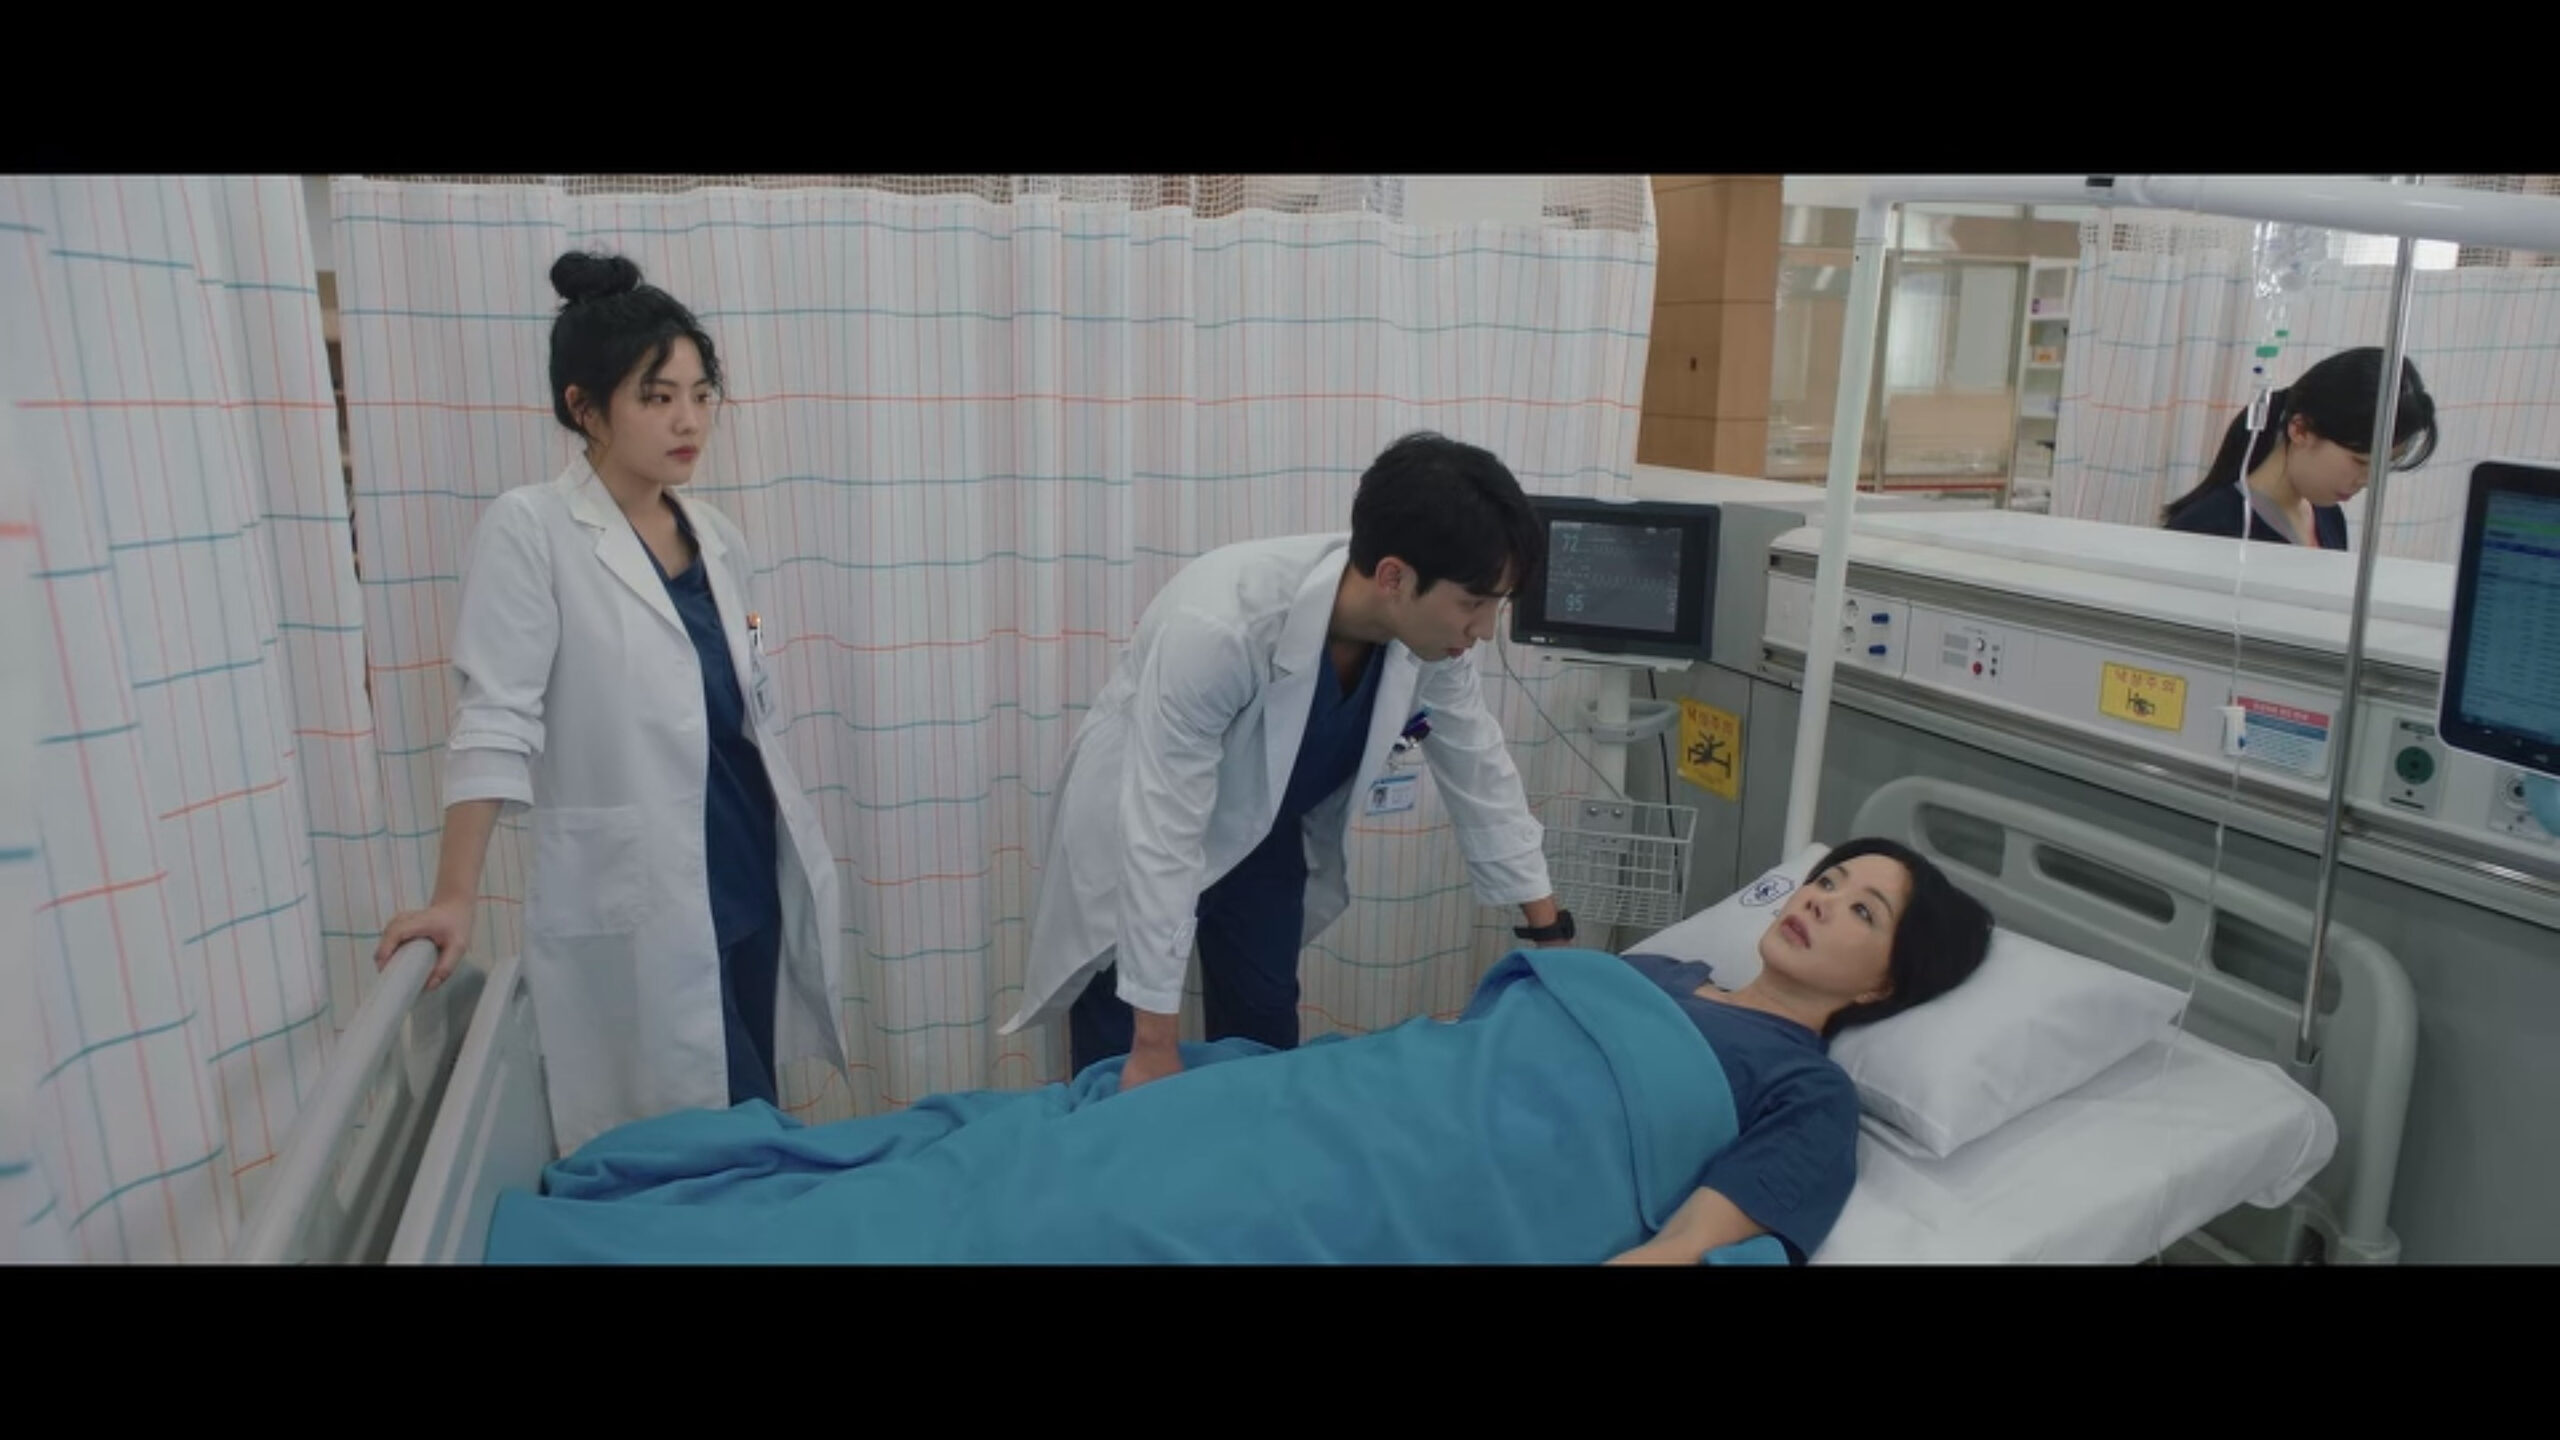 Doctor Cha: Episodes 5-6